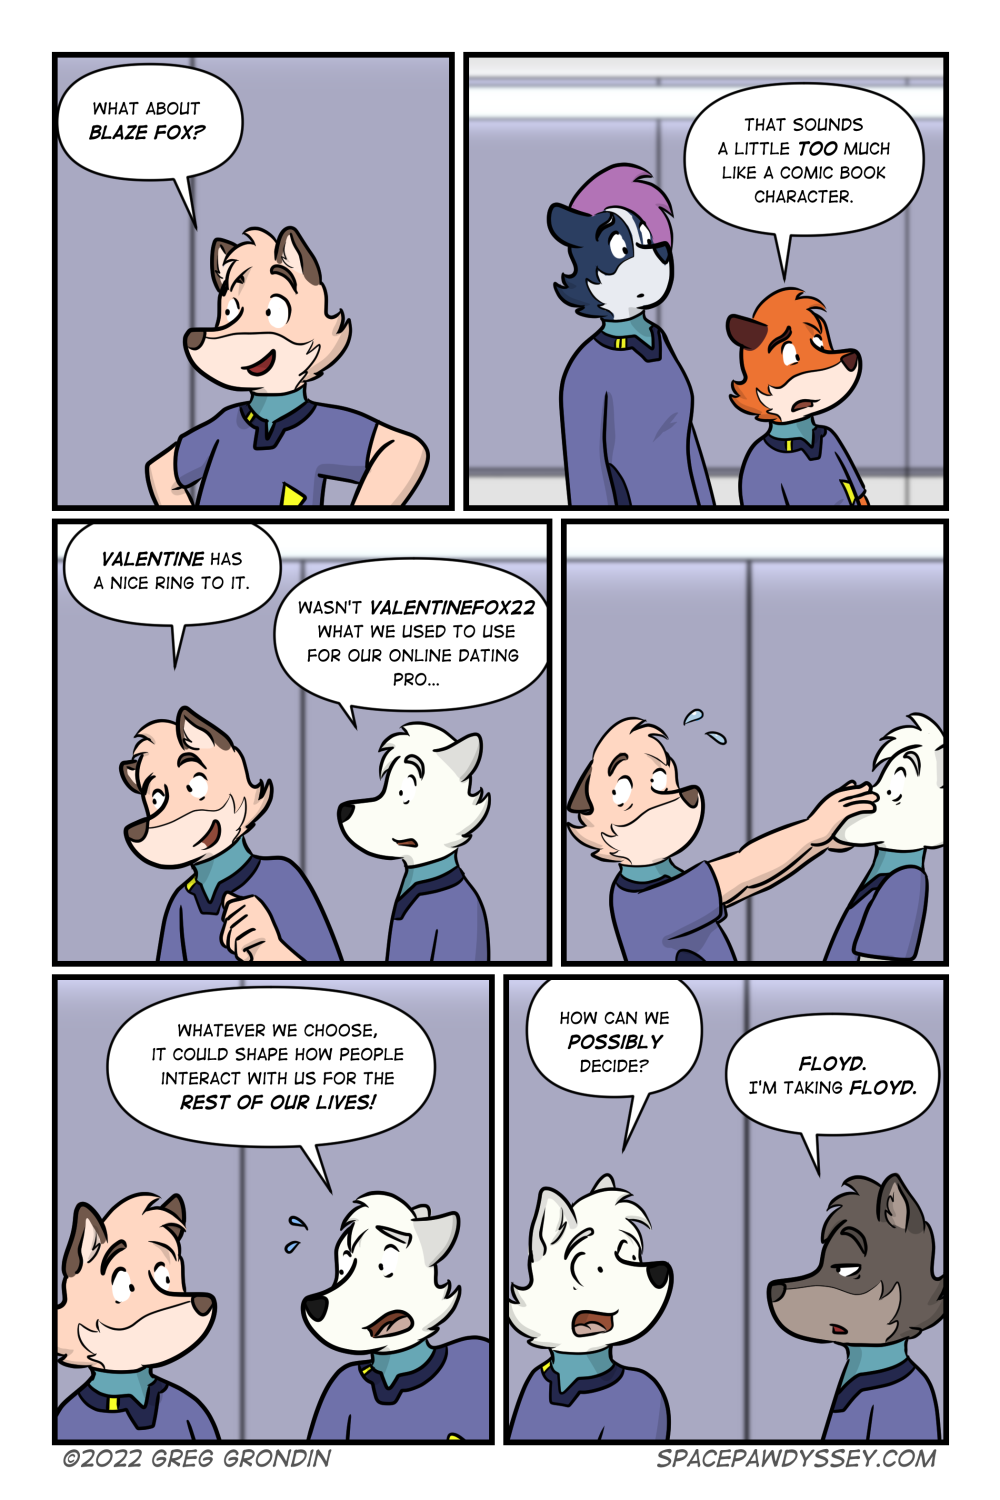 Space Pawdyssey #603